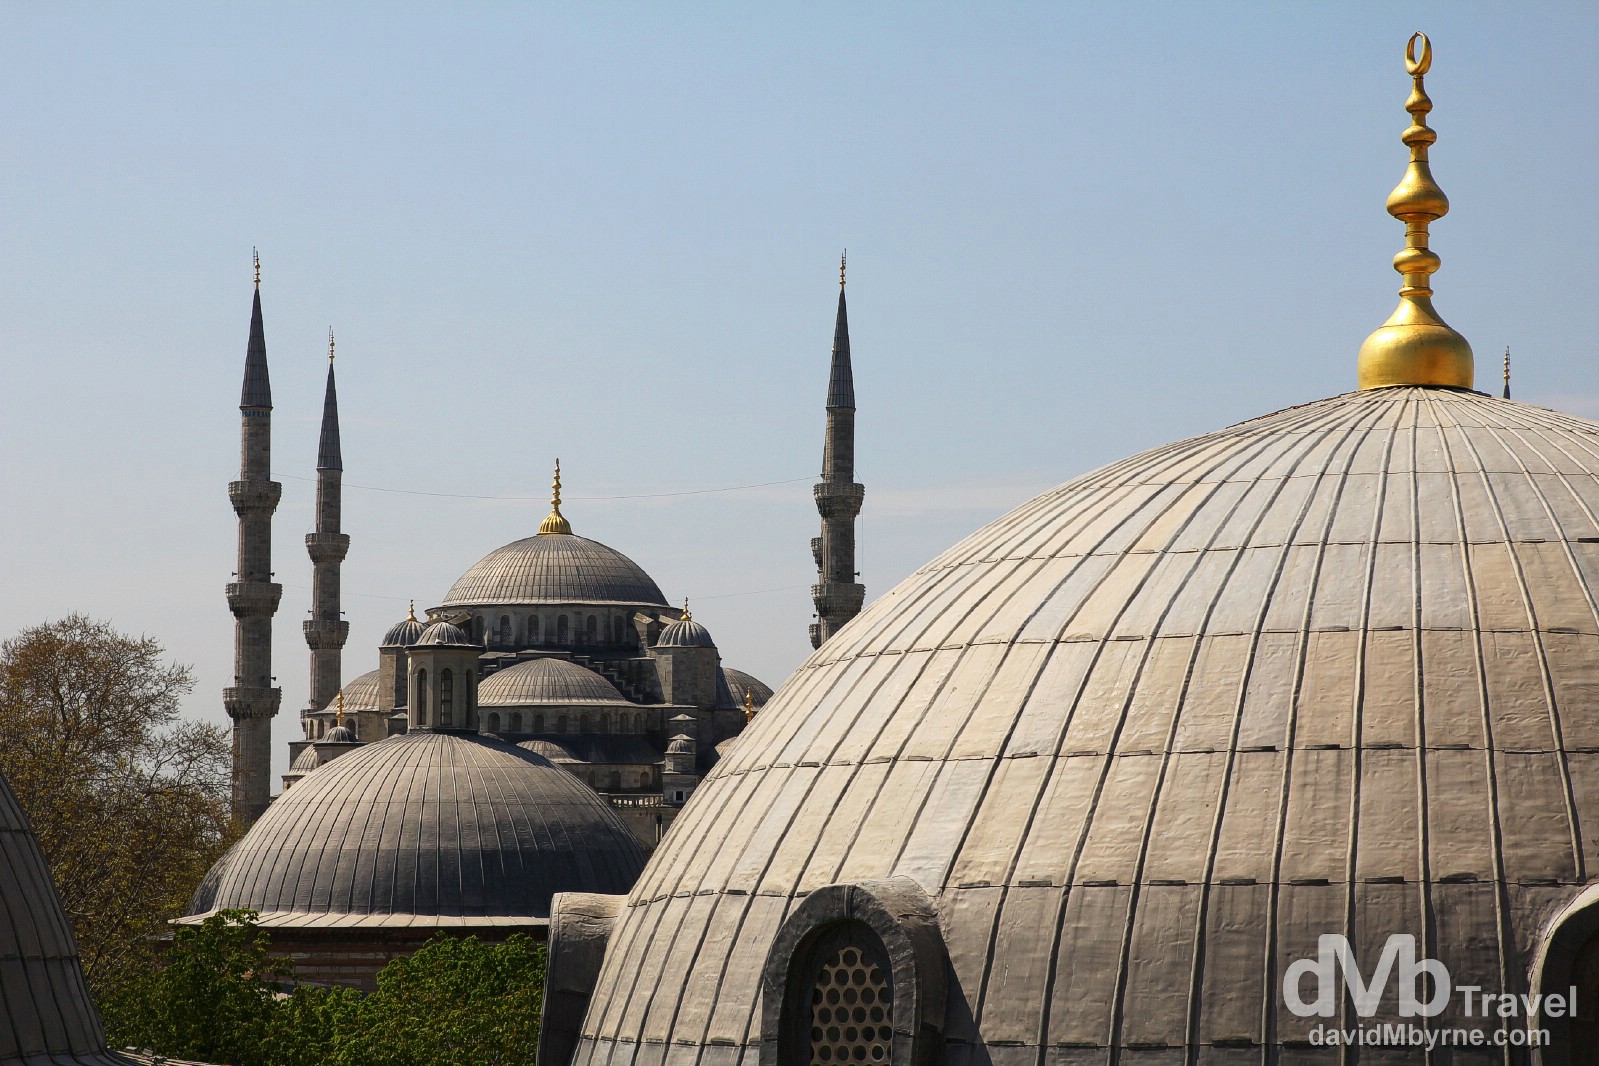 The Sultan Ahmed Mosque, aka The Blue Mosque, as seen from the upper windows of the Aya Sofya. Istanbul, Turkey. April 10th, 2014.